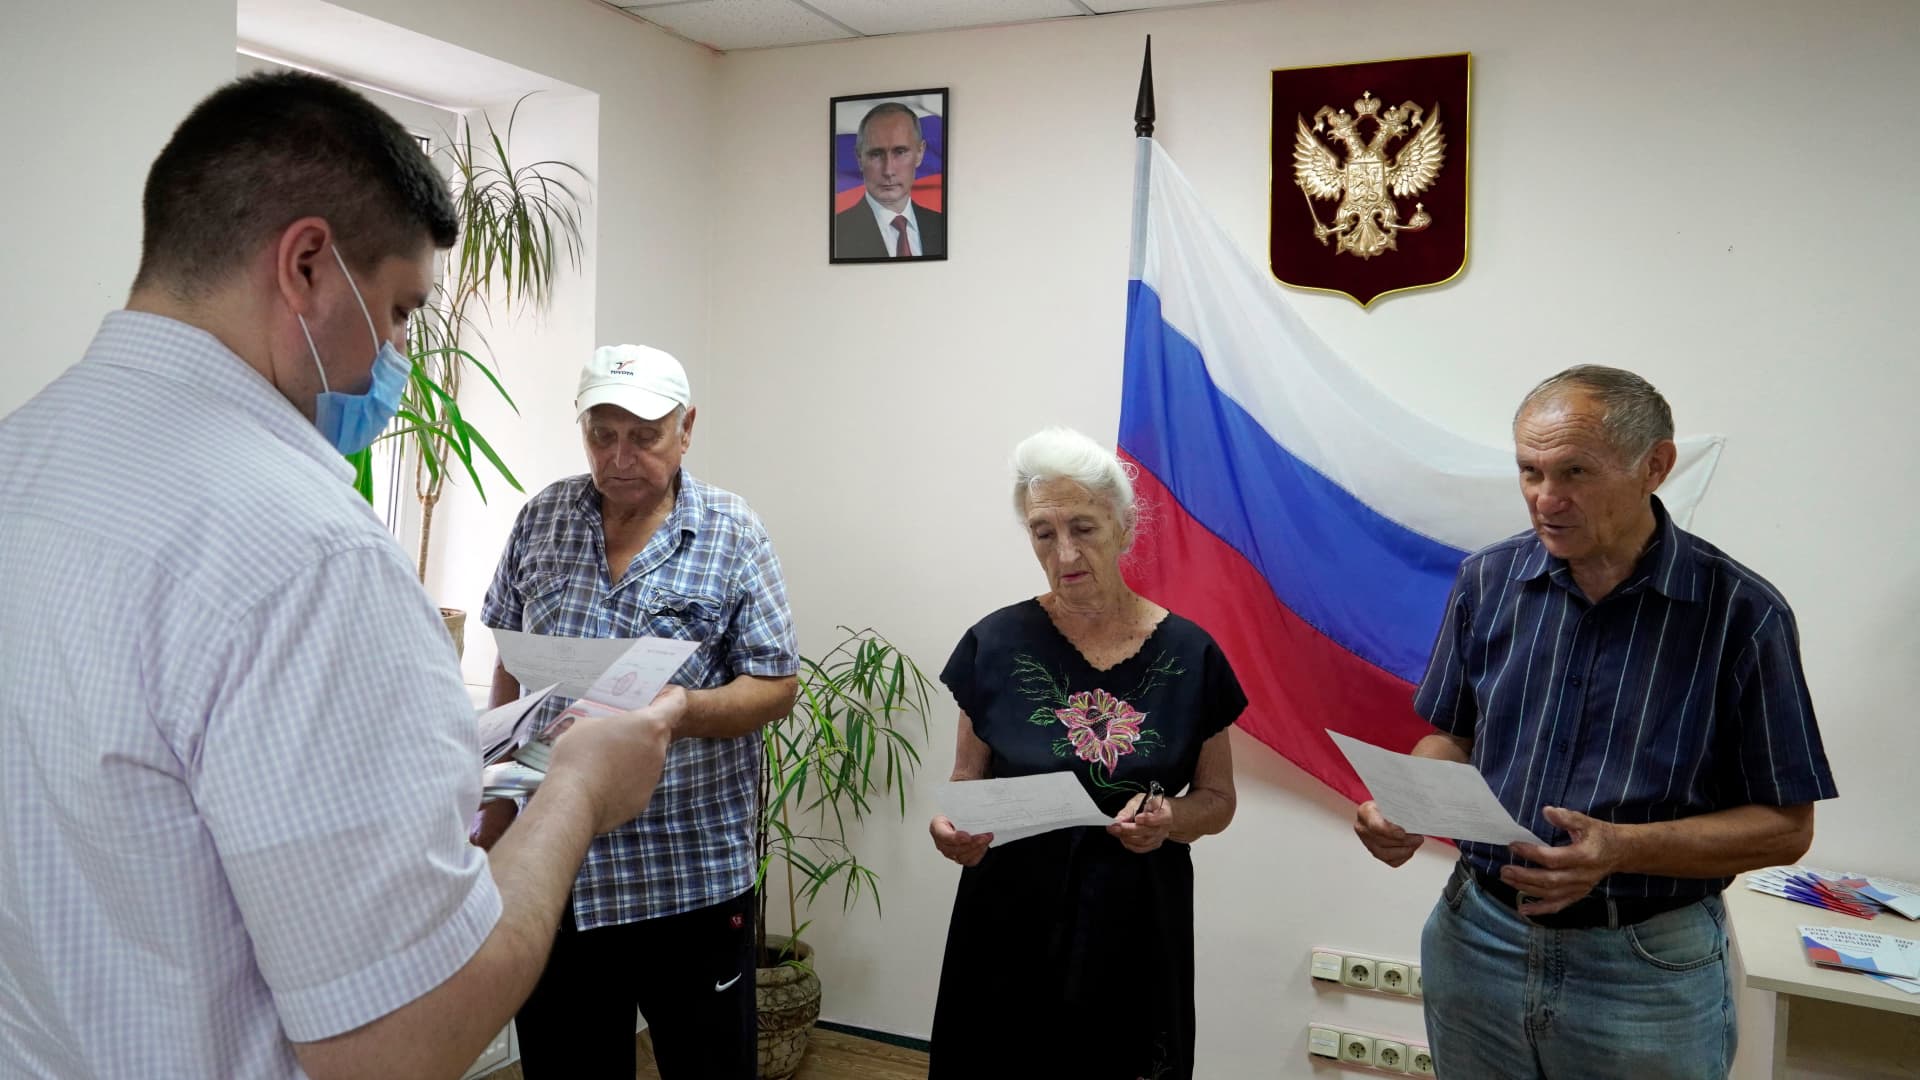 Residents receive Russian passports in Kherson on July 21, 2022, amid the ongoing Russian military action in Ukraine.